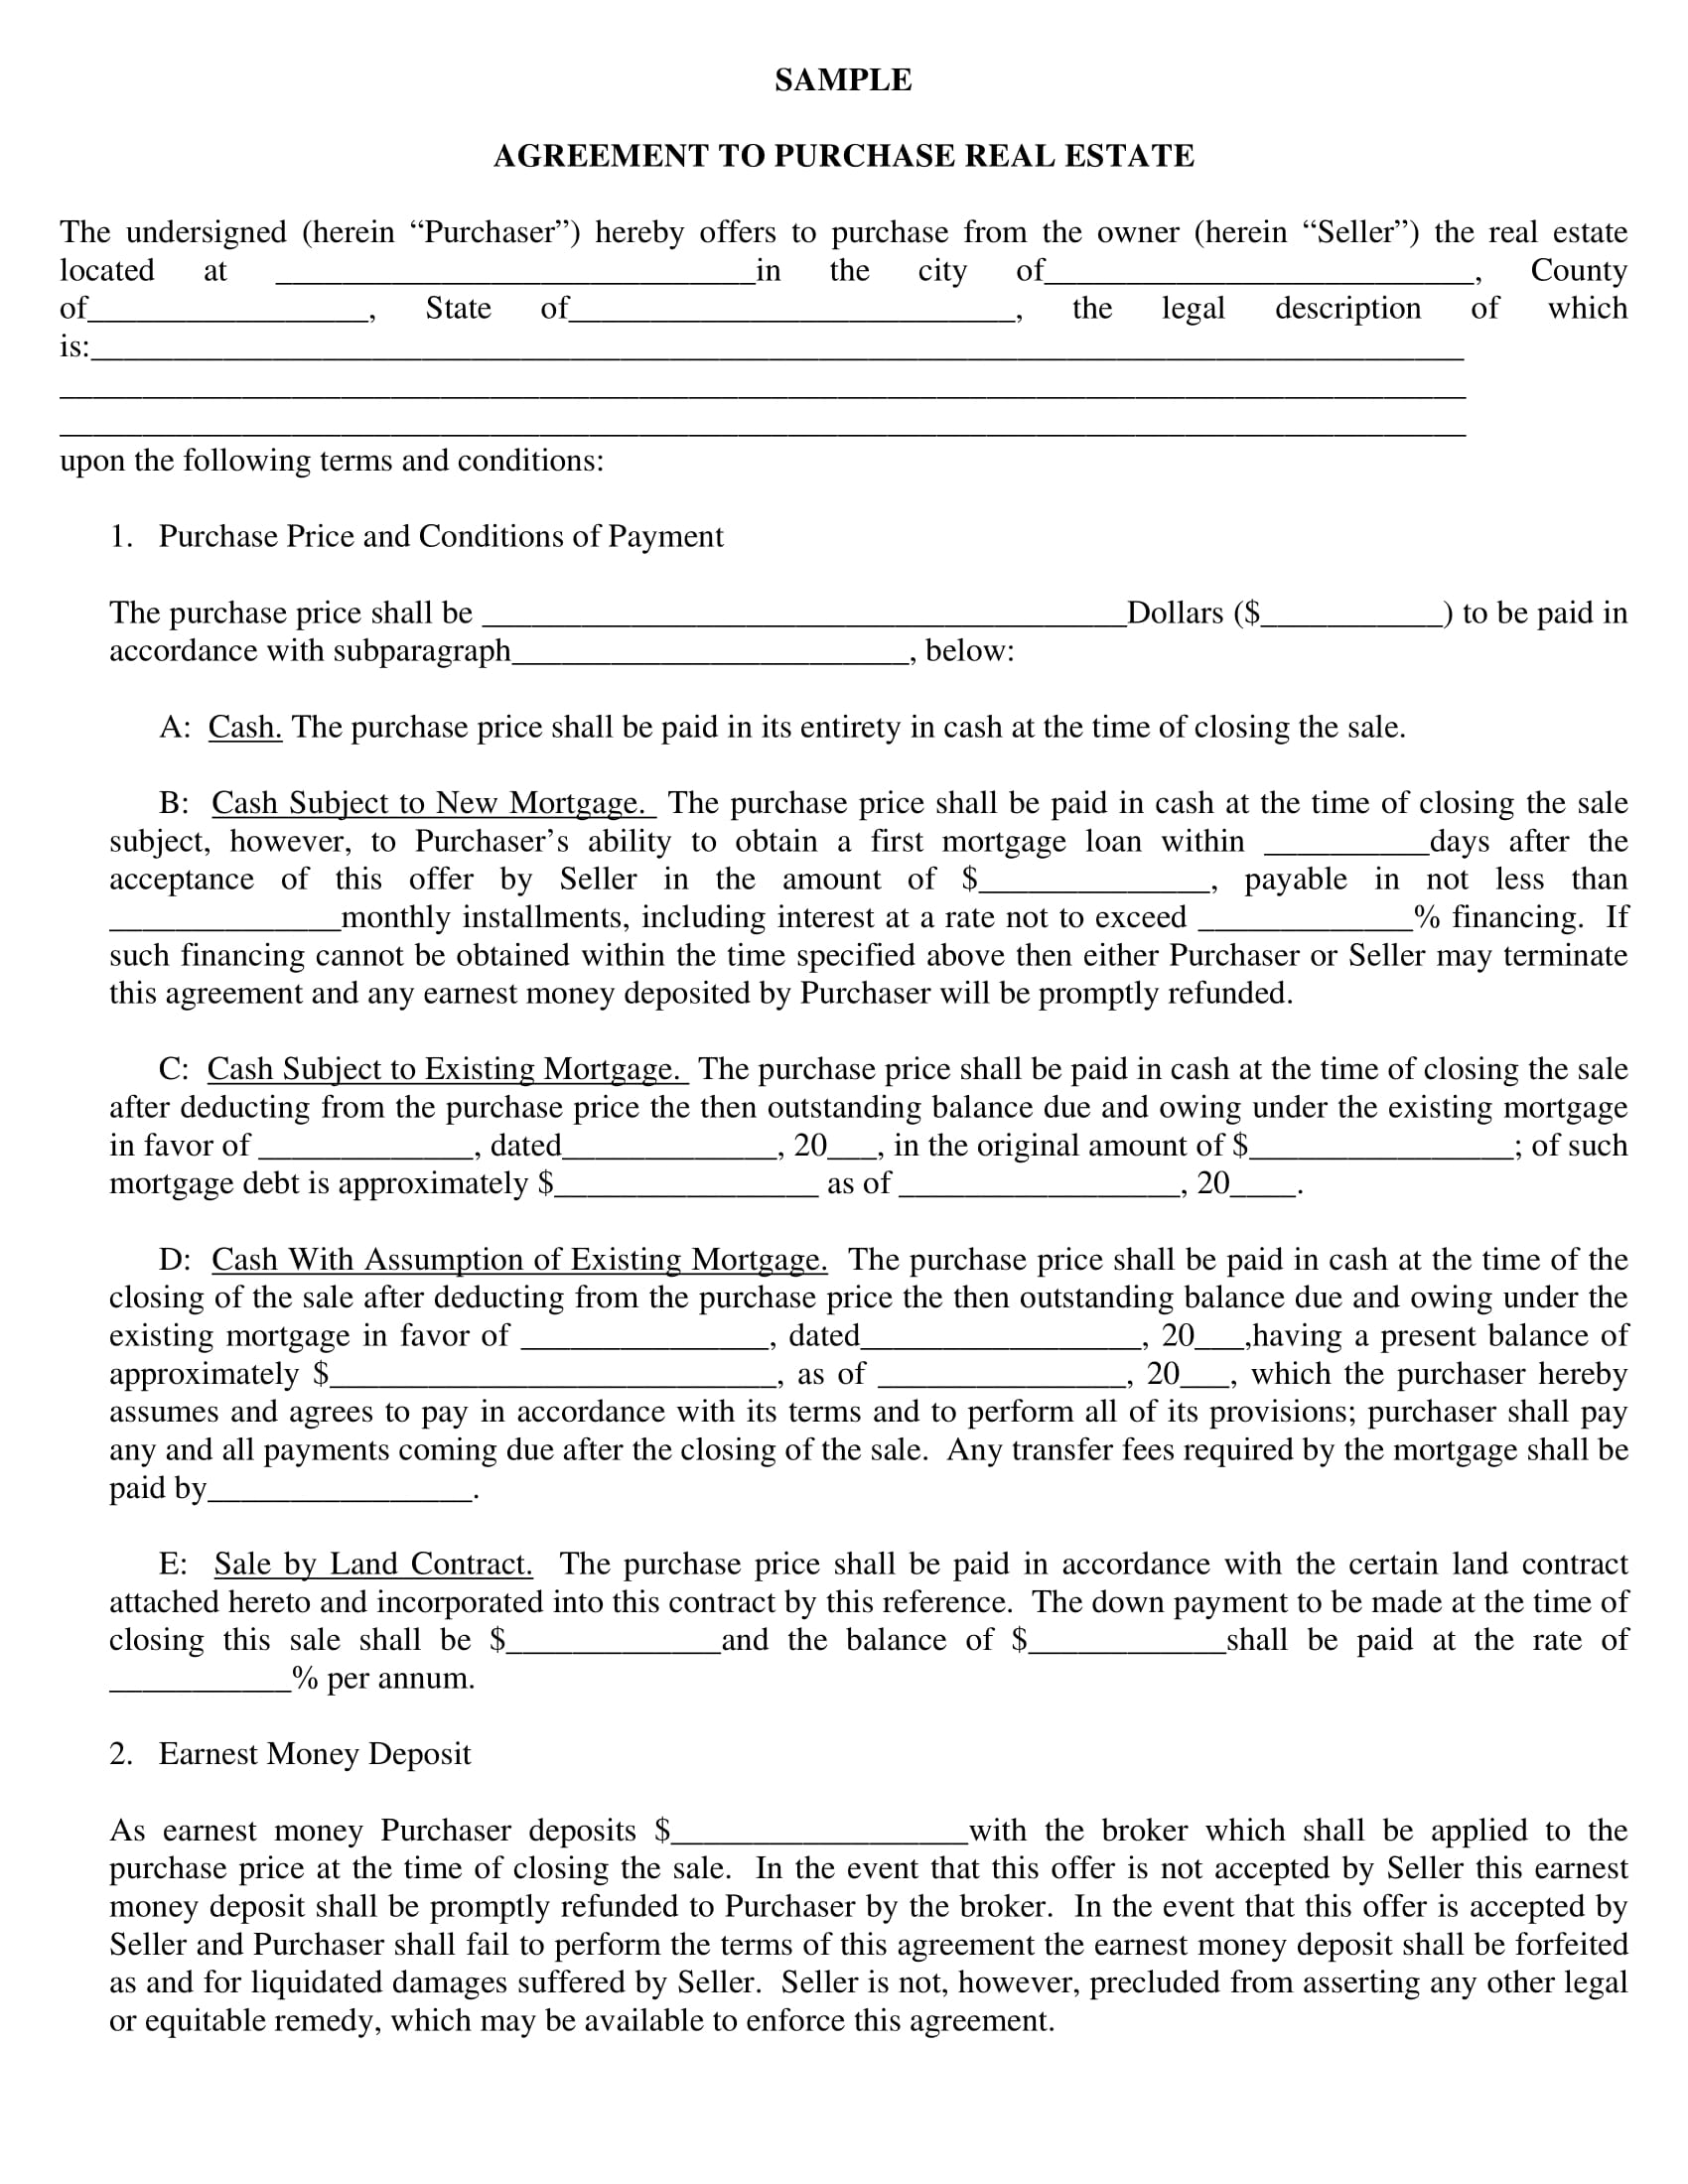 real estate purchase agreement example